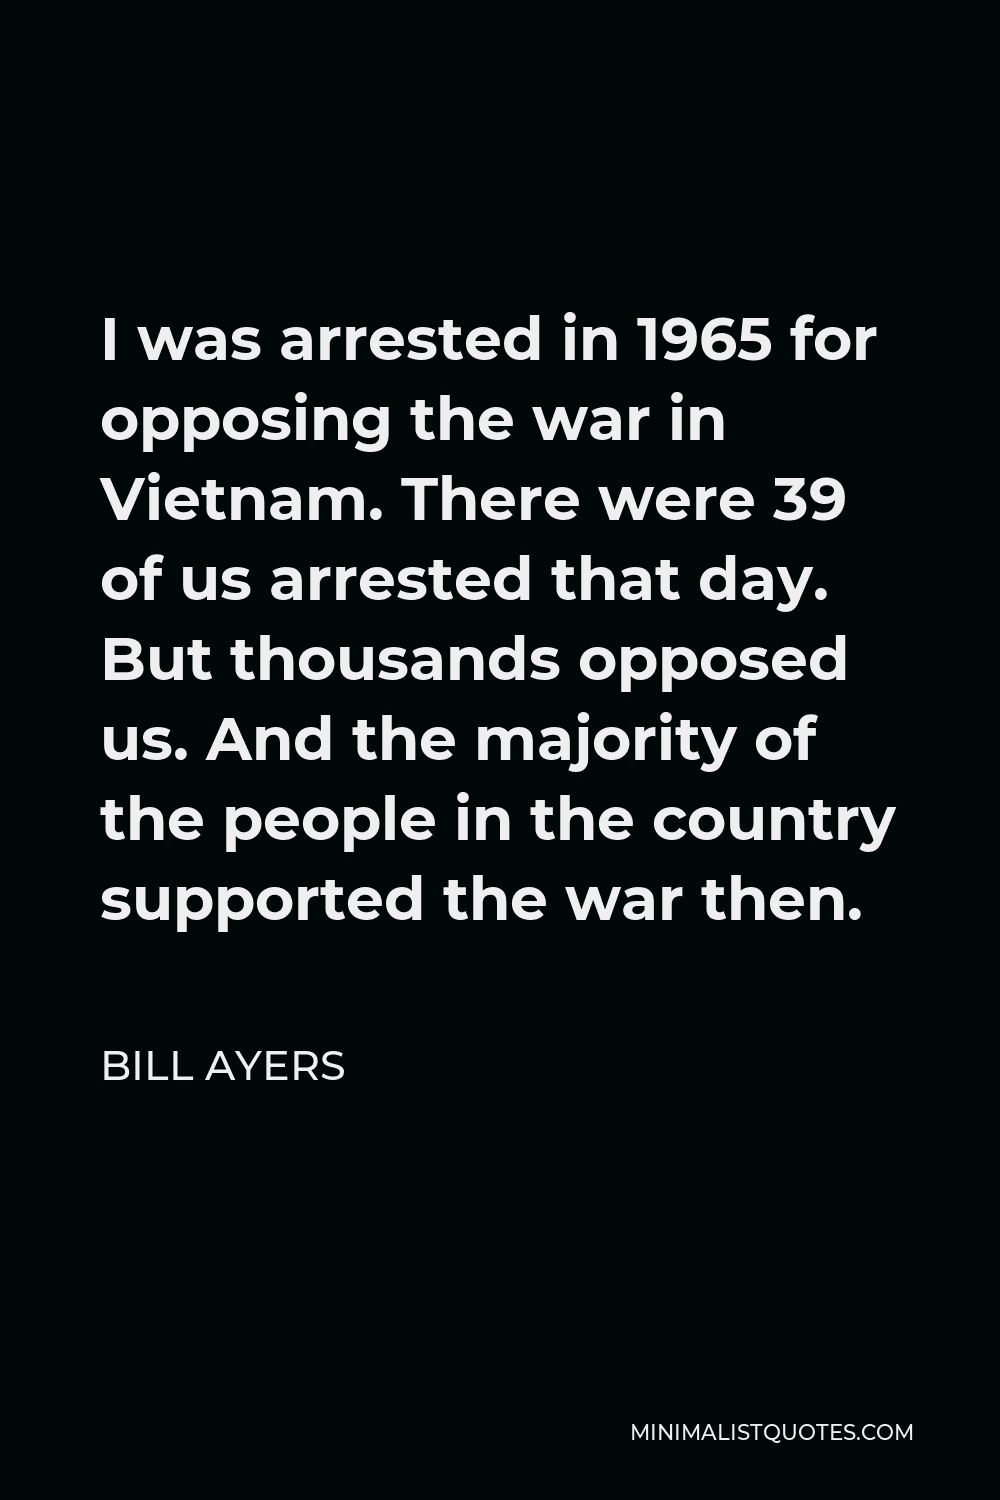 Bill Ayers Quote - I was arrested in 1965 for opposing the war in Vietnam. There were 39 of us arrested that day. But thousands opposed us. And the majority of the people in the country supported the war then.